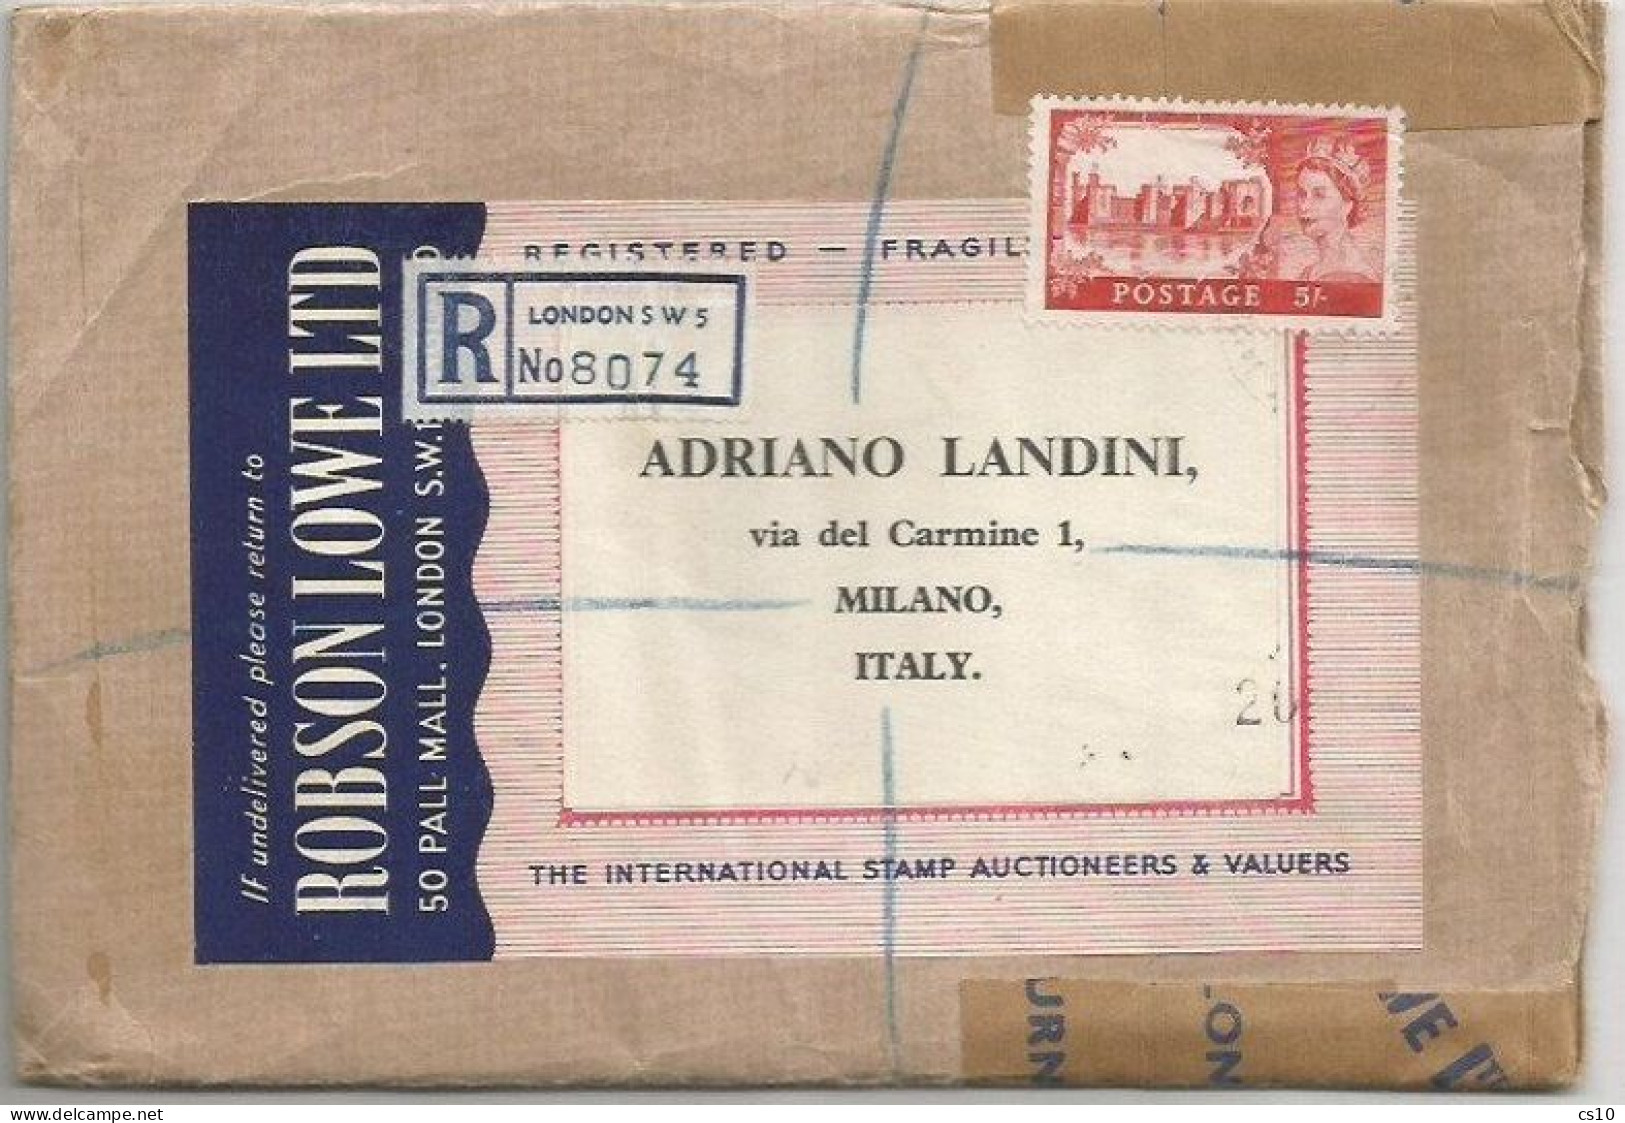 UK Britain Castles QE2 S5 Solo Franking Reg.CV London 3march 1967 To Italy - Storia Postale